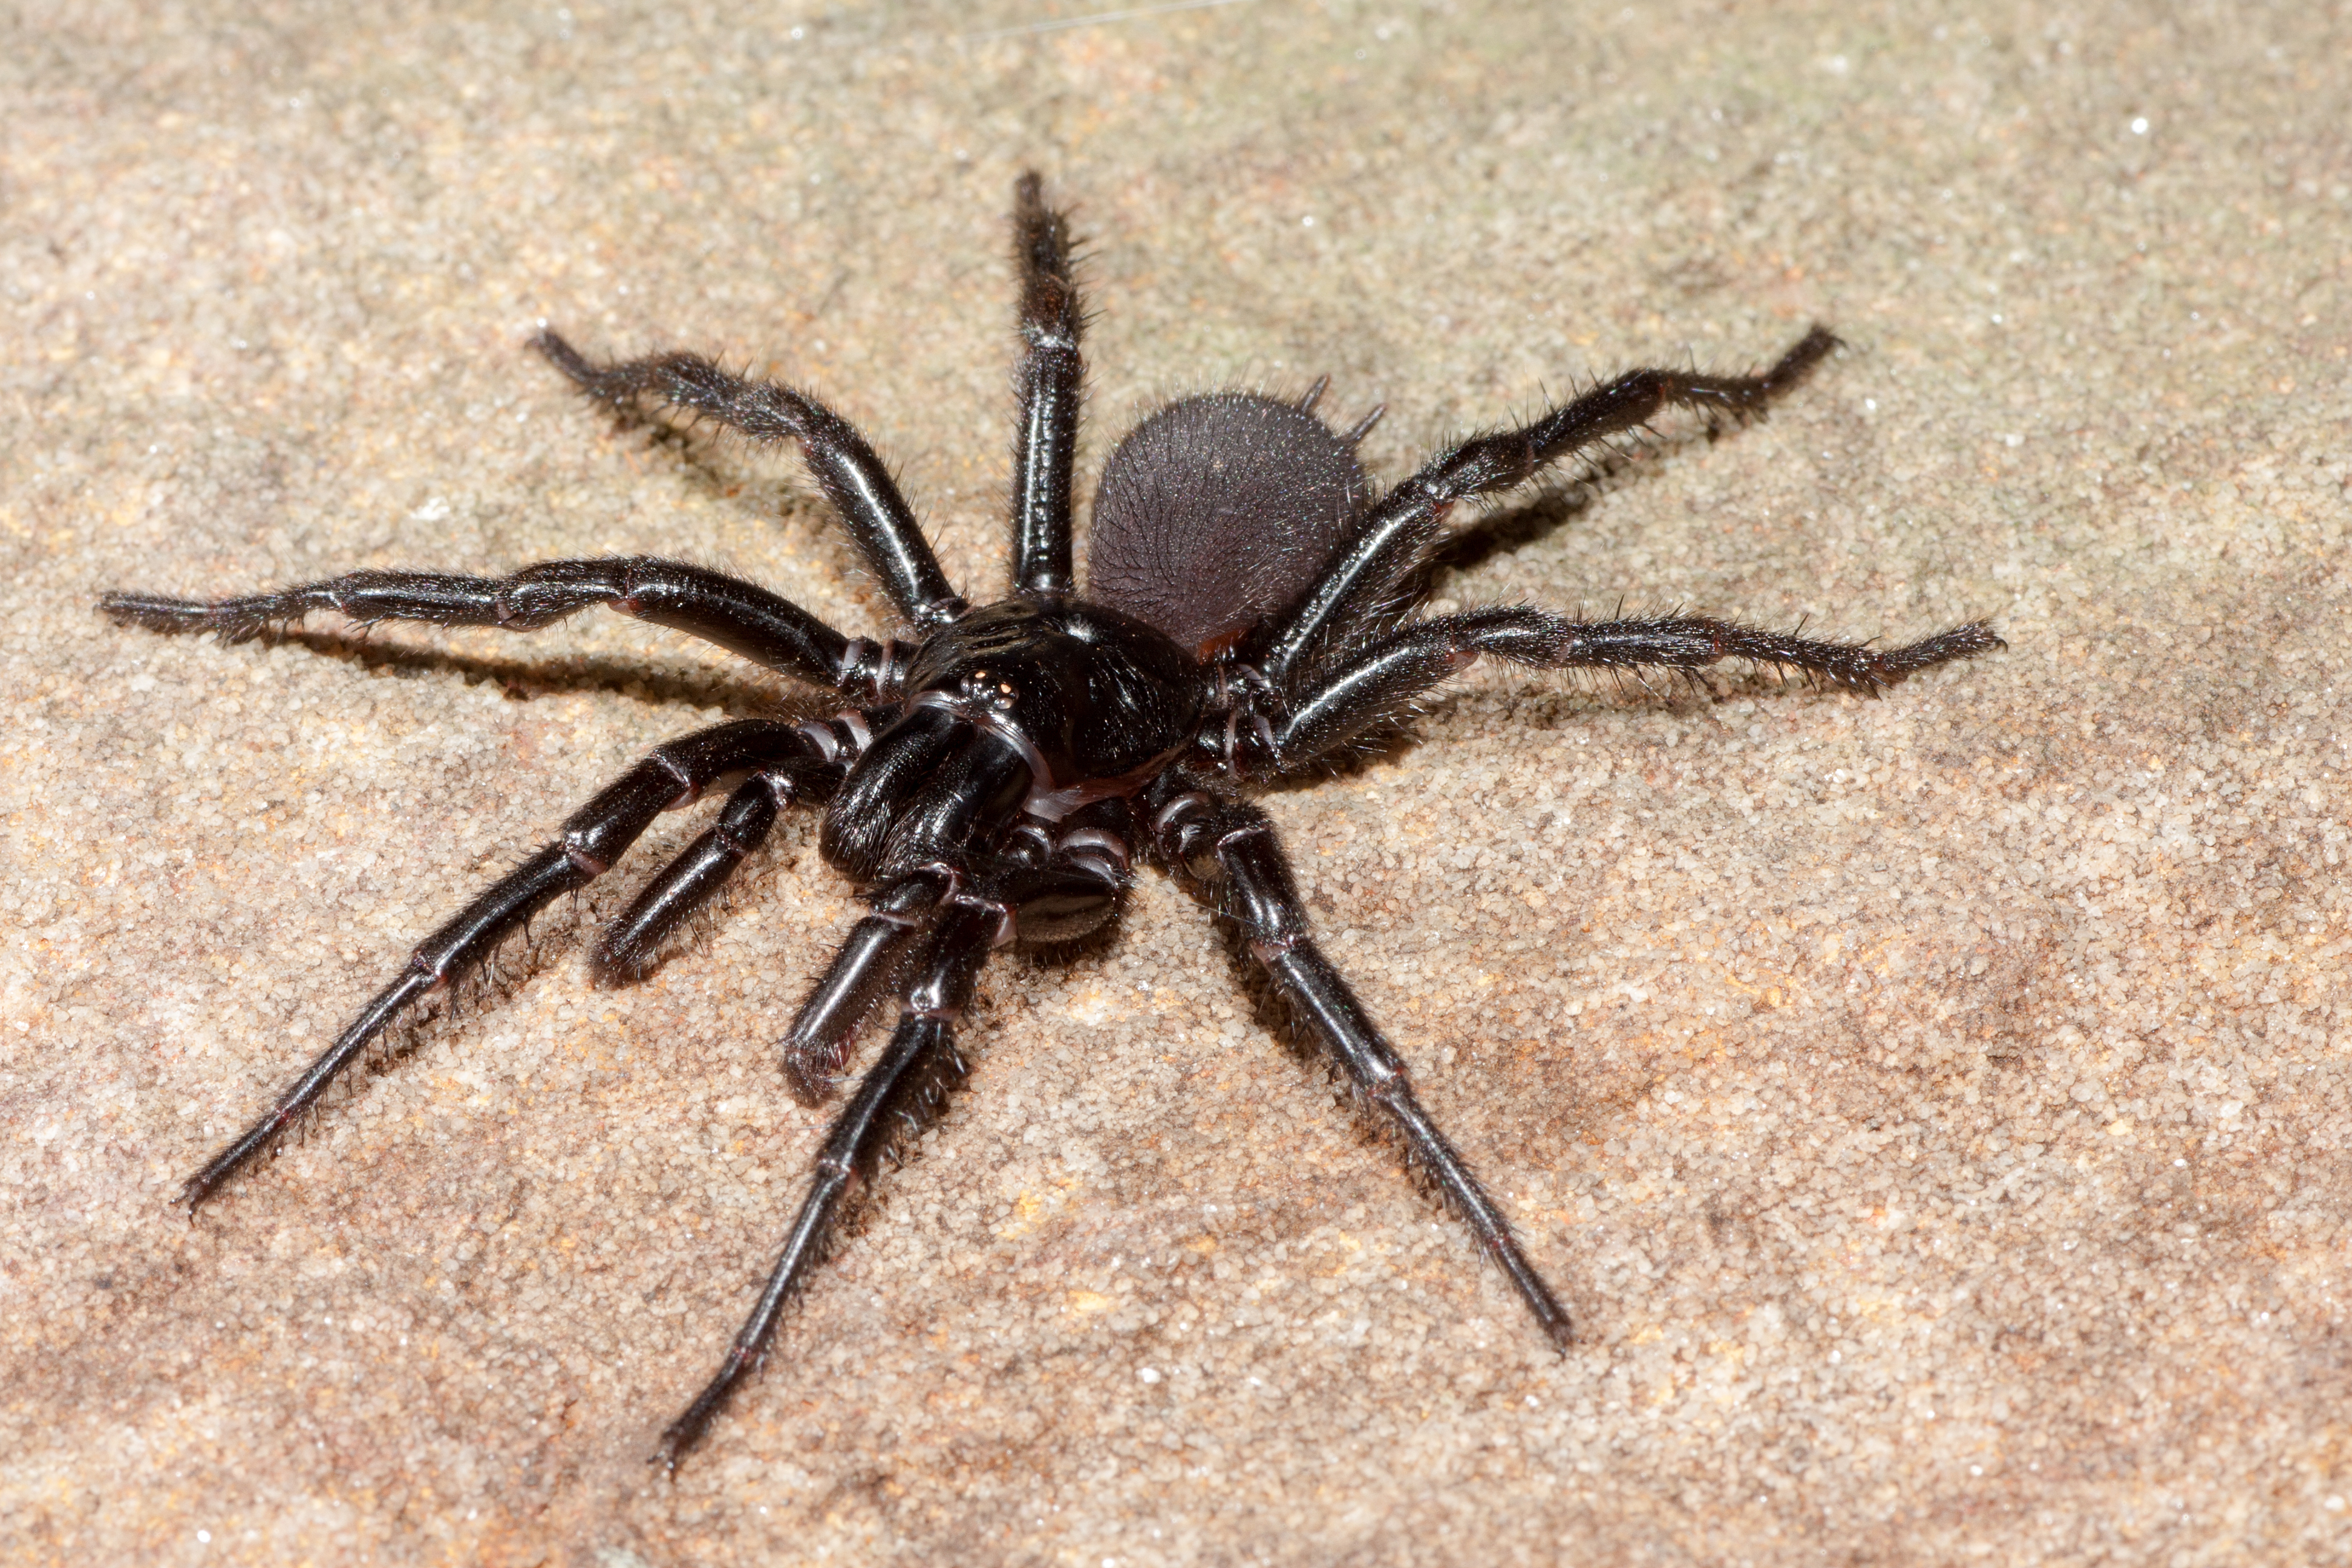 We may finally know why male funnel web spiders are so ...